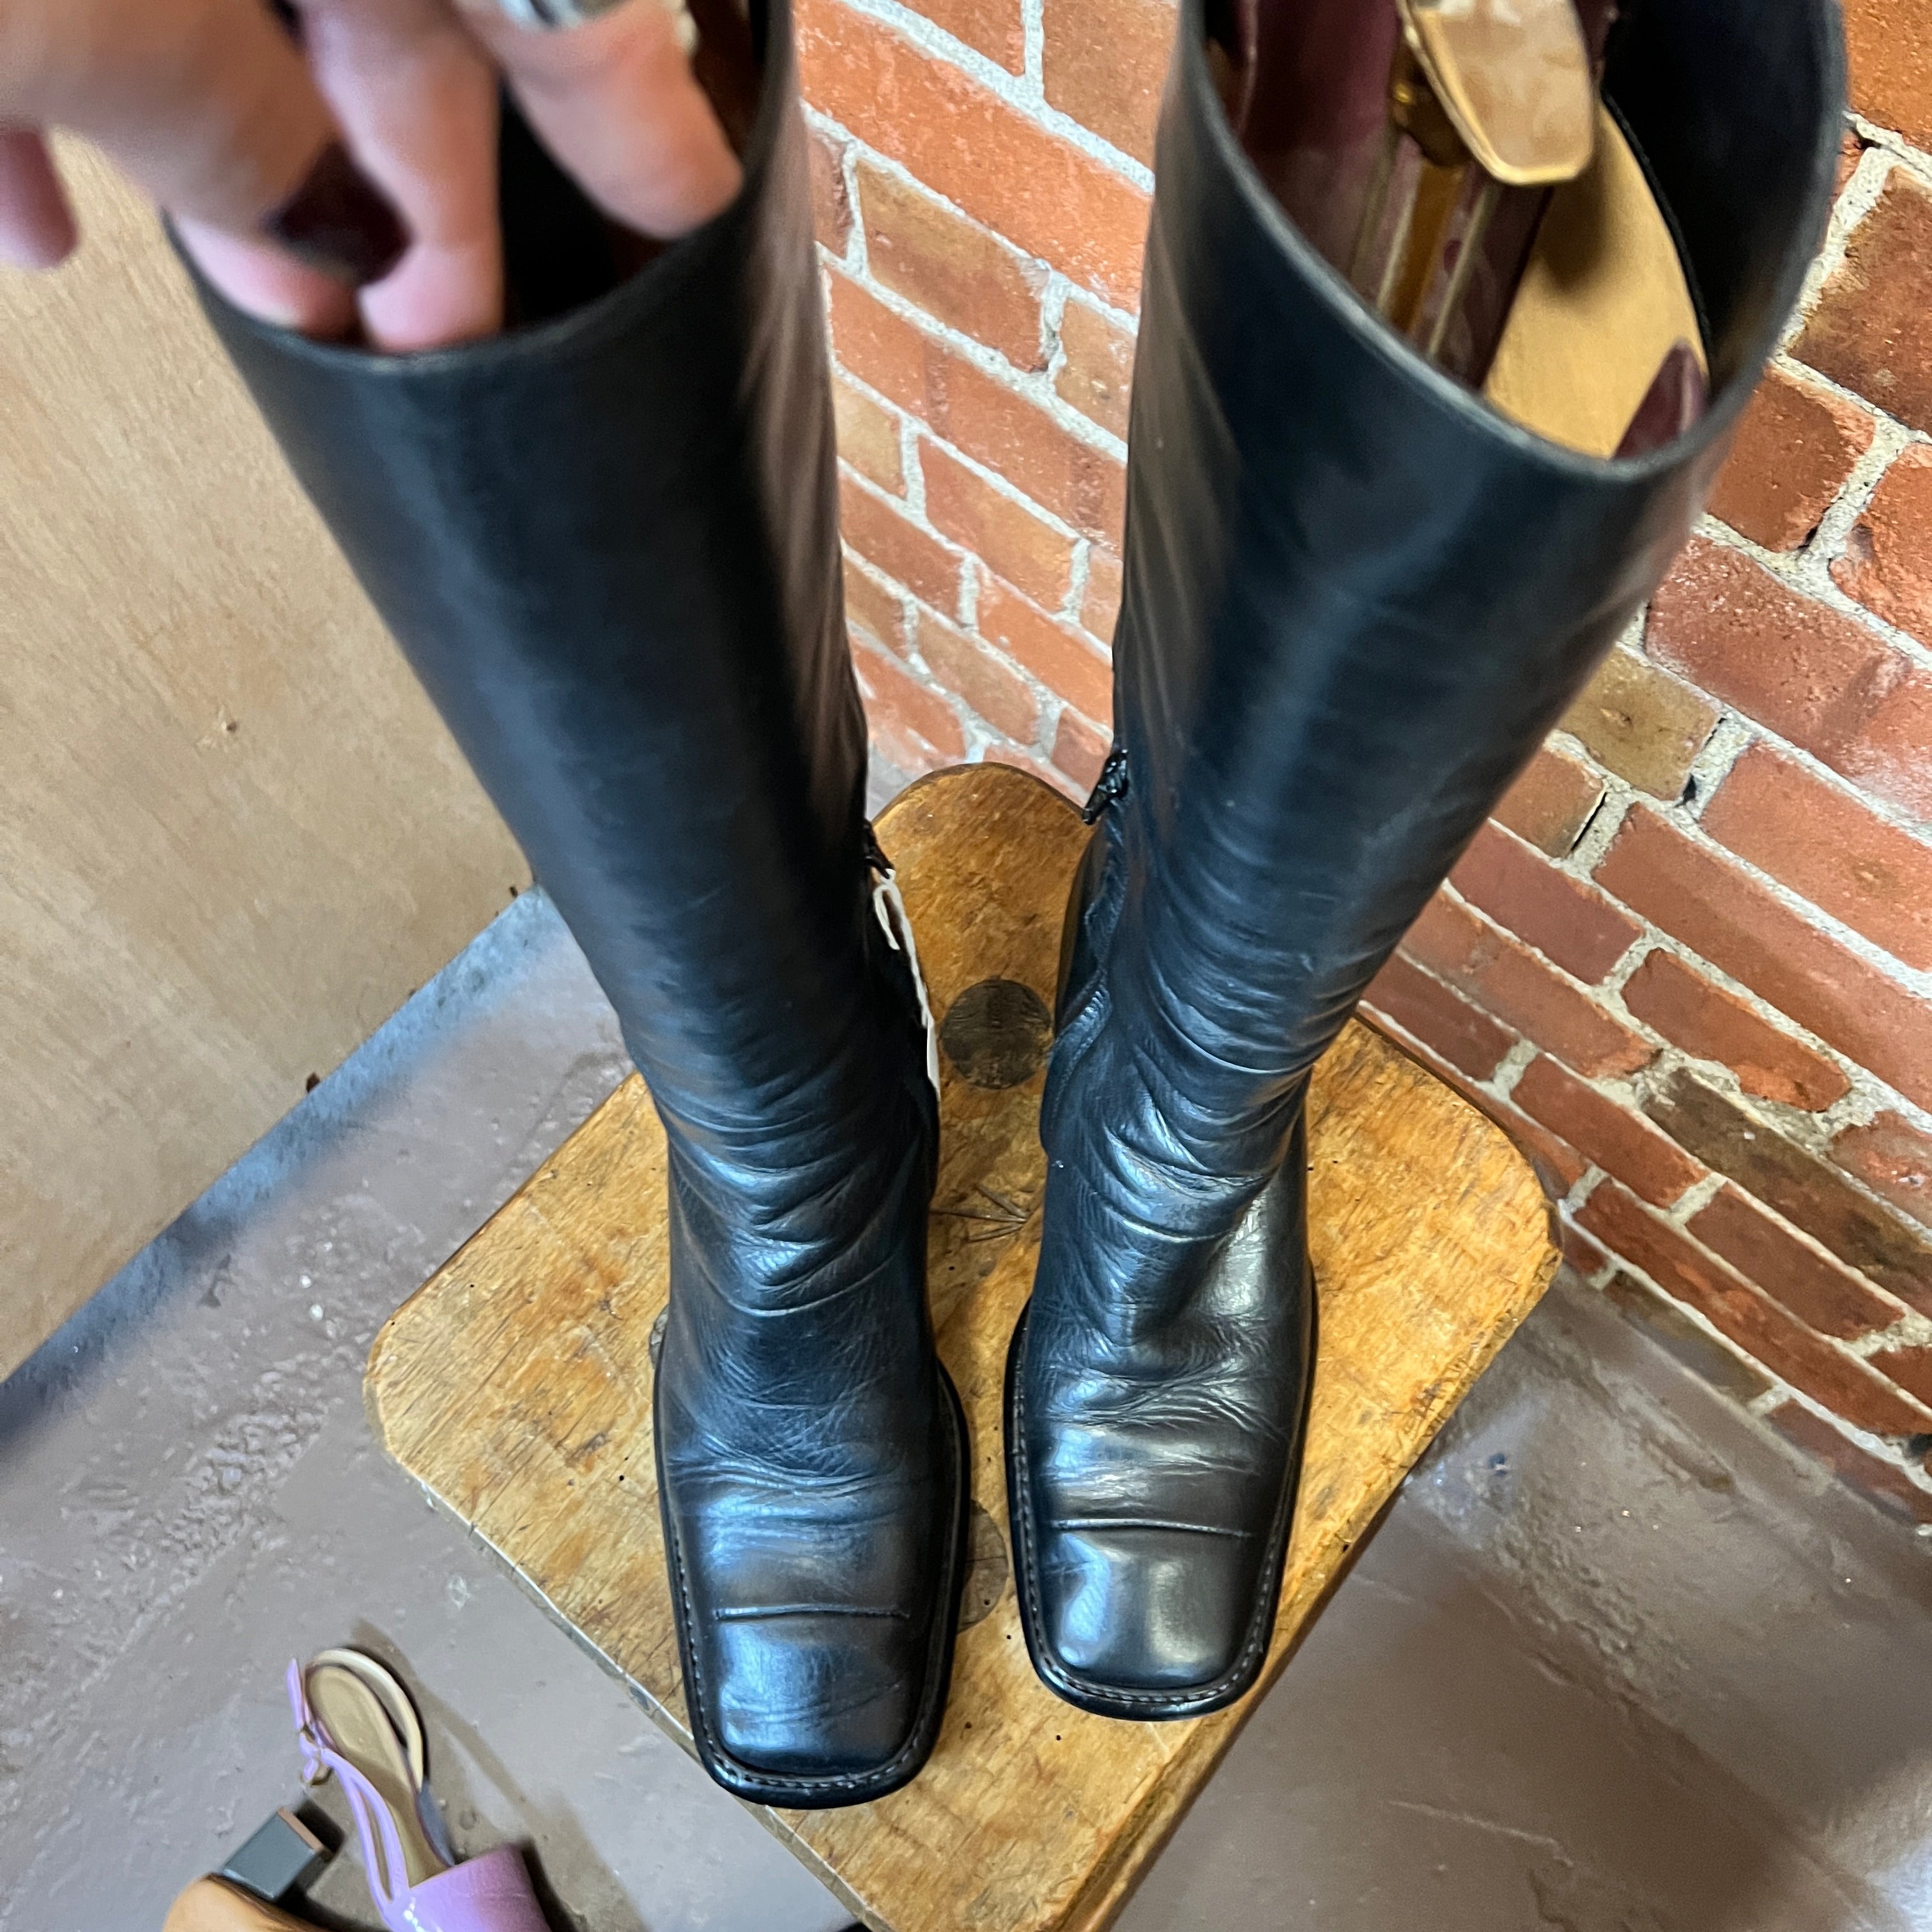 COSTUME NATIONAL tall leather boots 39